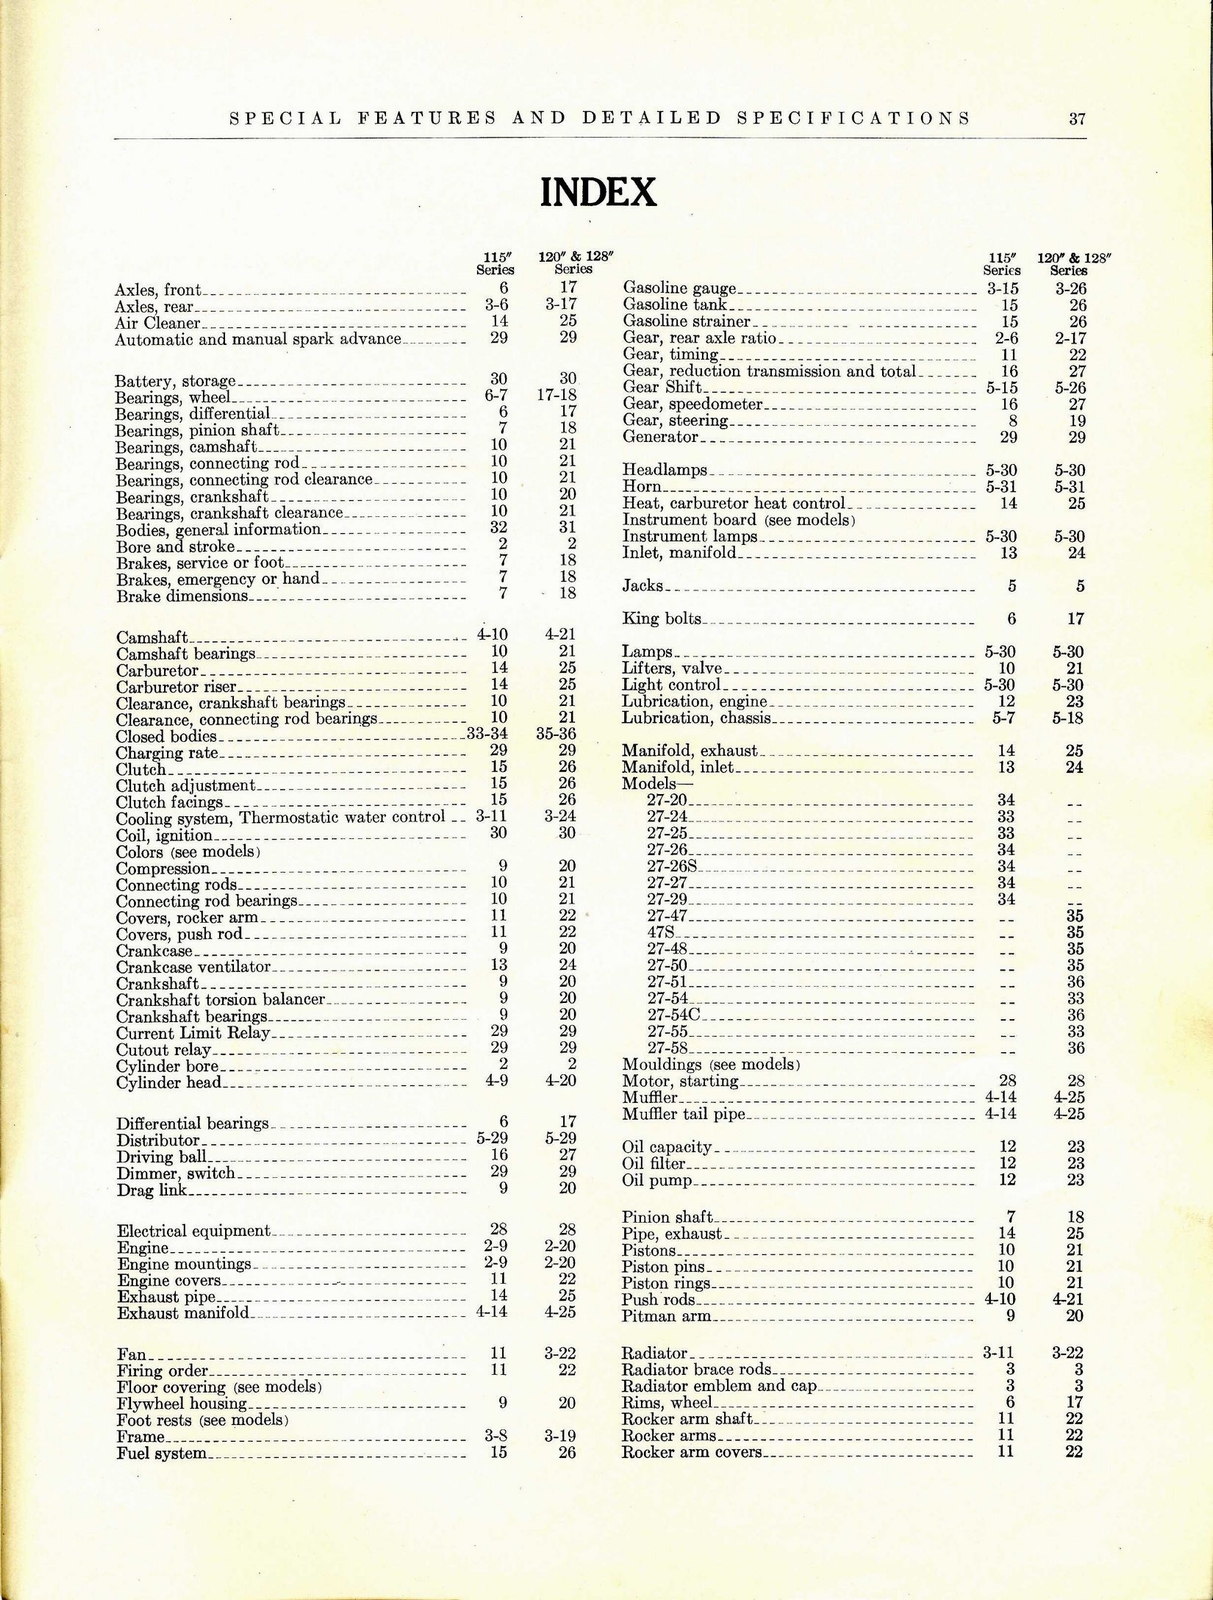 n_1928 Buick Special Features and  Specs-37.jpg